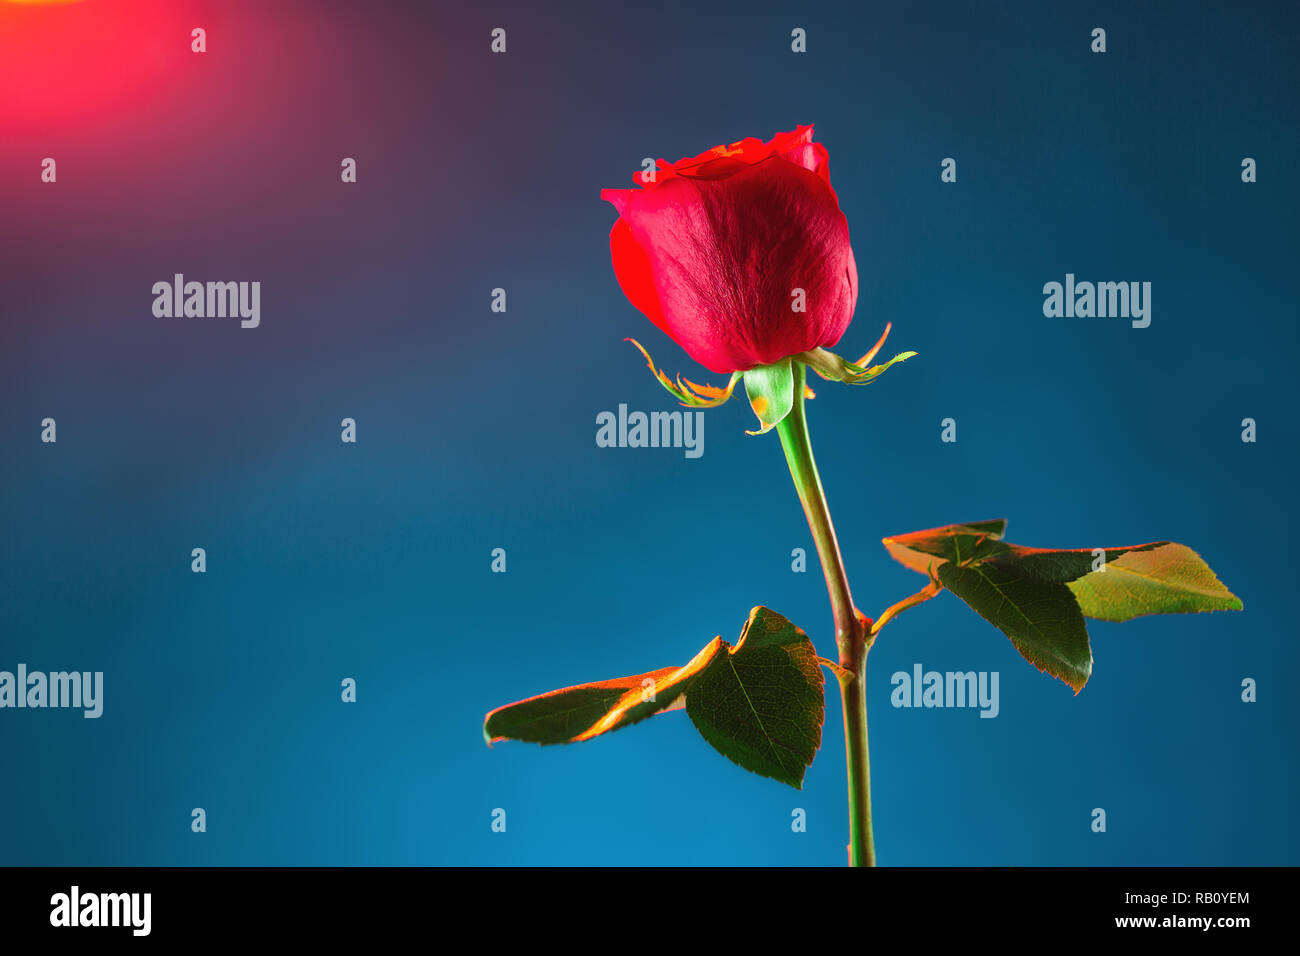 Red rose on blue background. Stock Photo